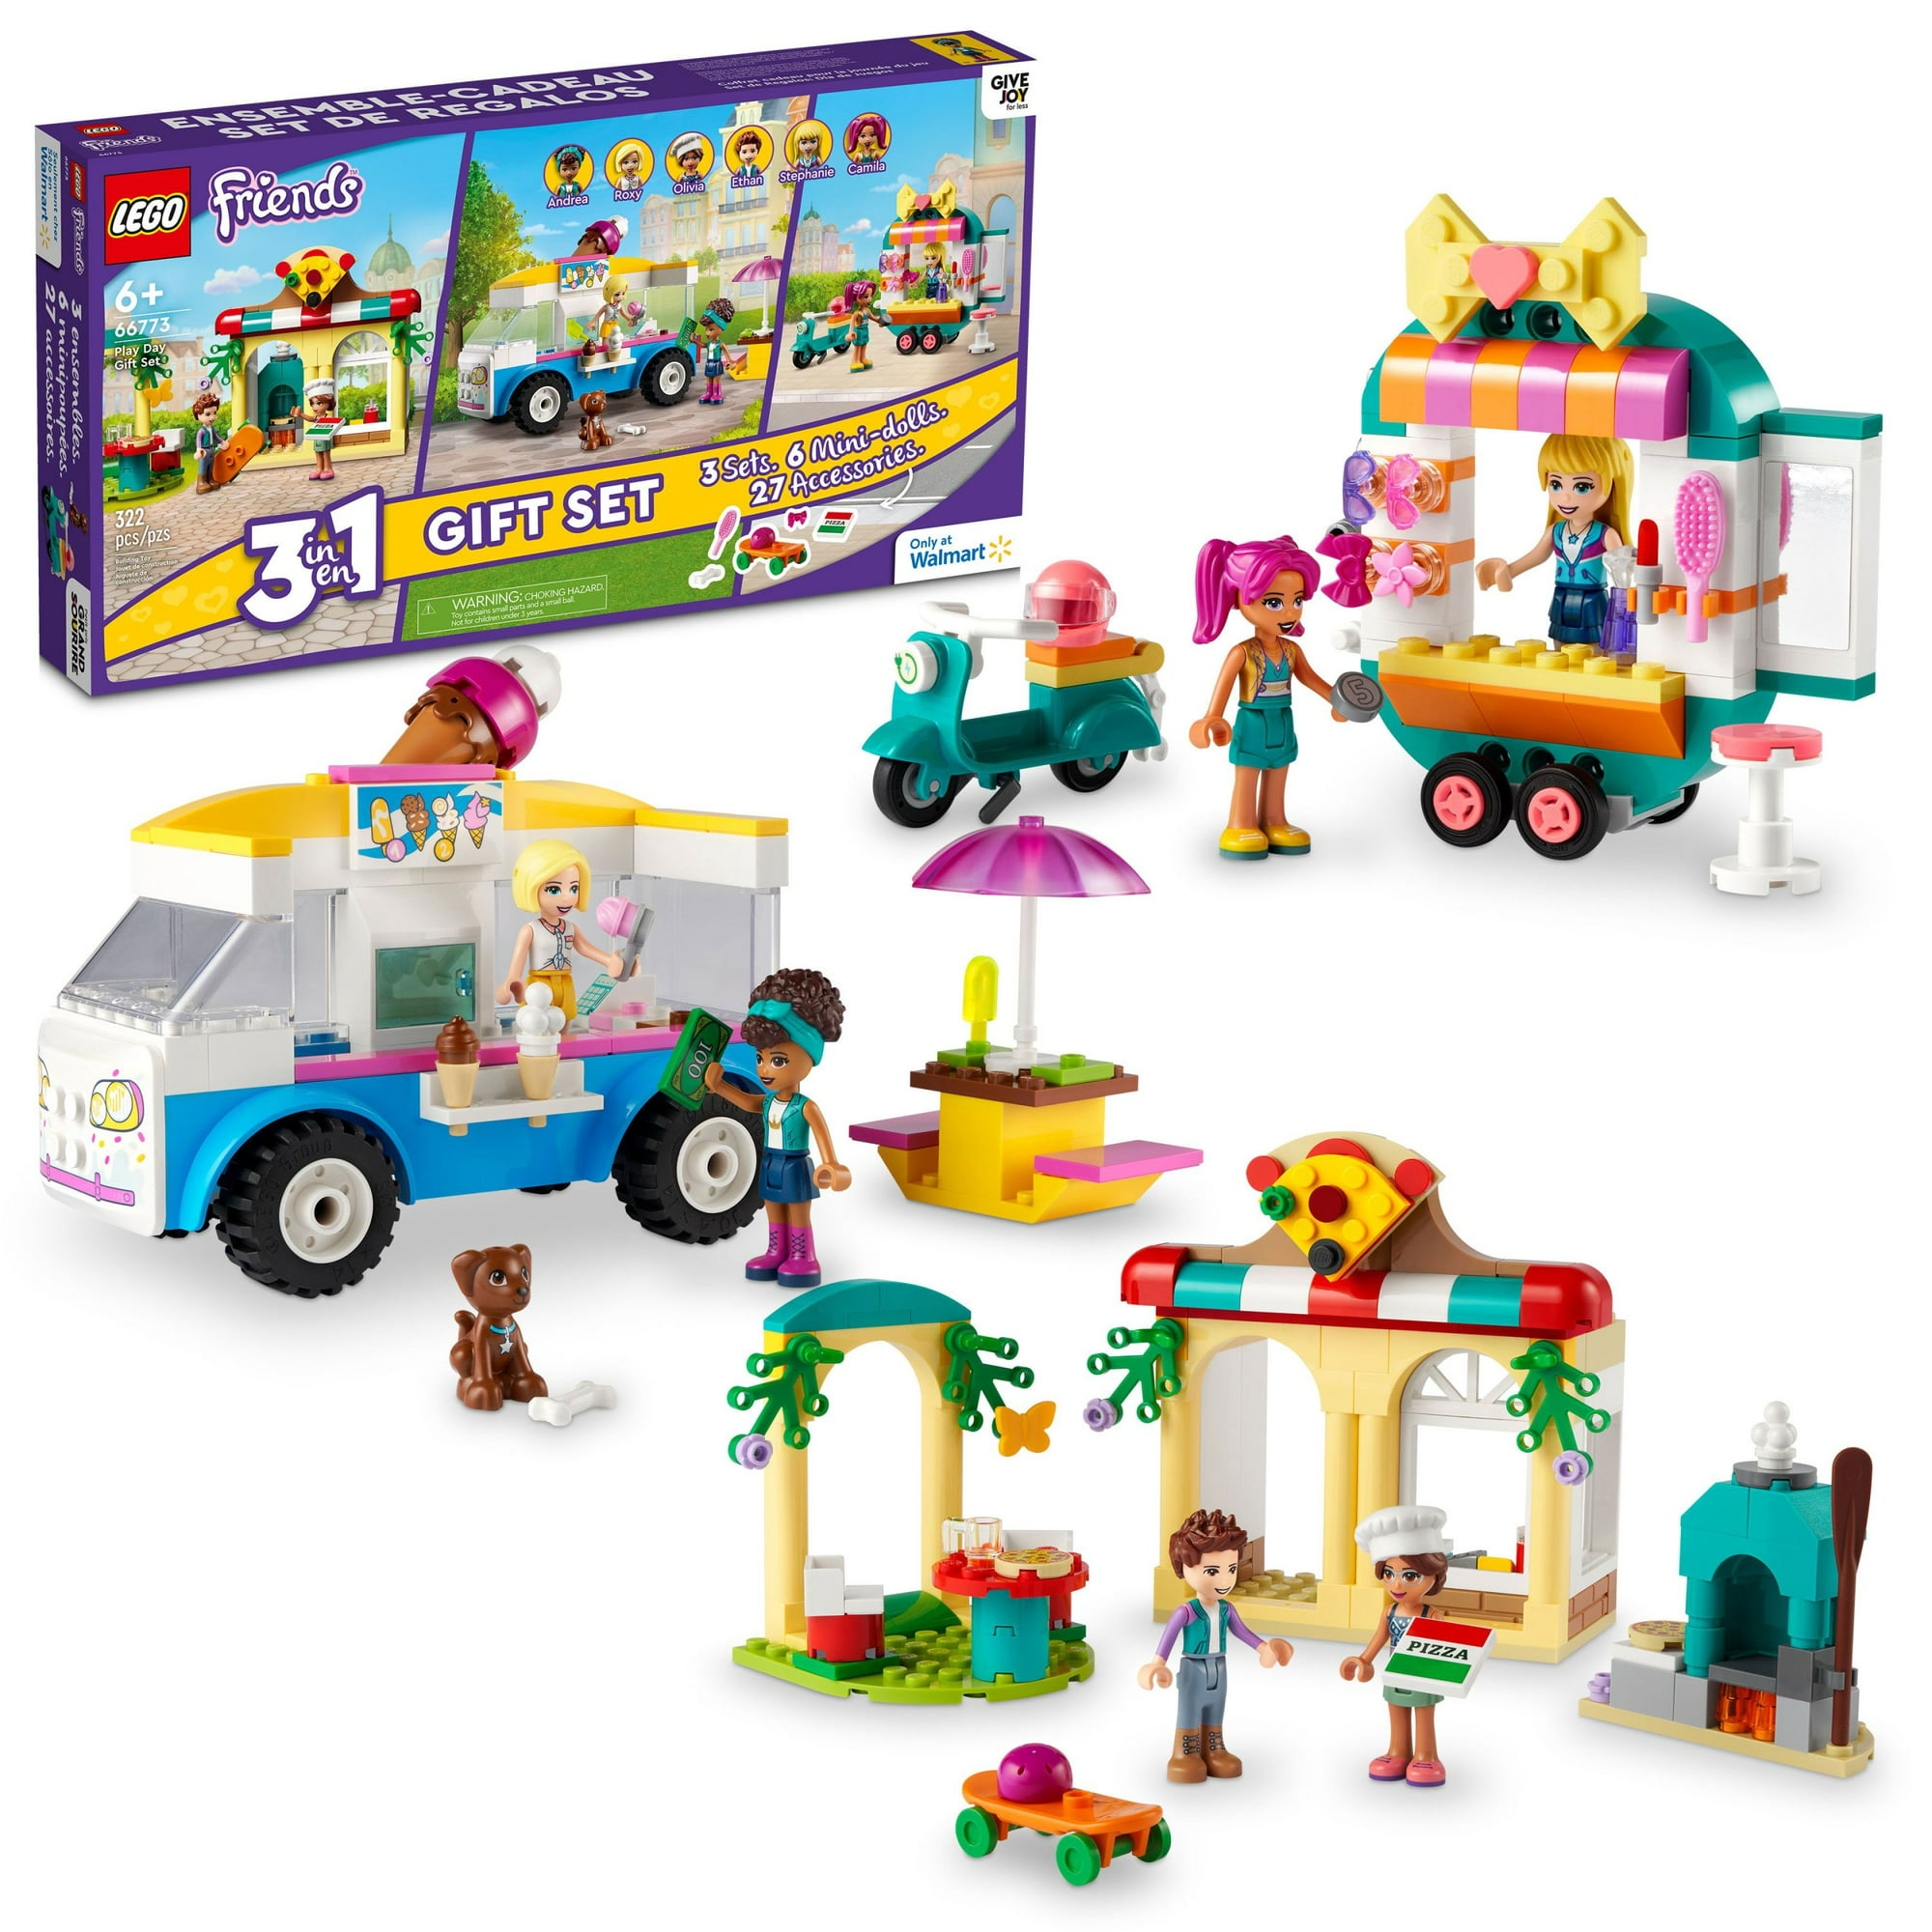 LEGO Friends Play Day Gift Set 66773, 3 in 1 Building Toy Set for 6 Year Old Girls and Boys, Includes Ice Cream Truck, Mobile Fashion Boutique, and Pizzeria, Great Christmas Gift Idea